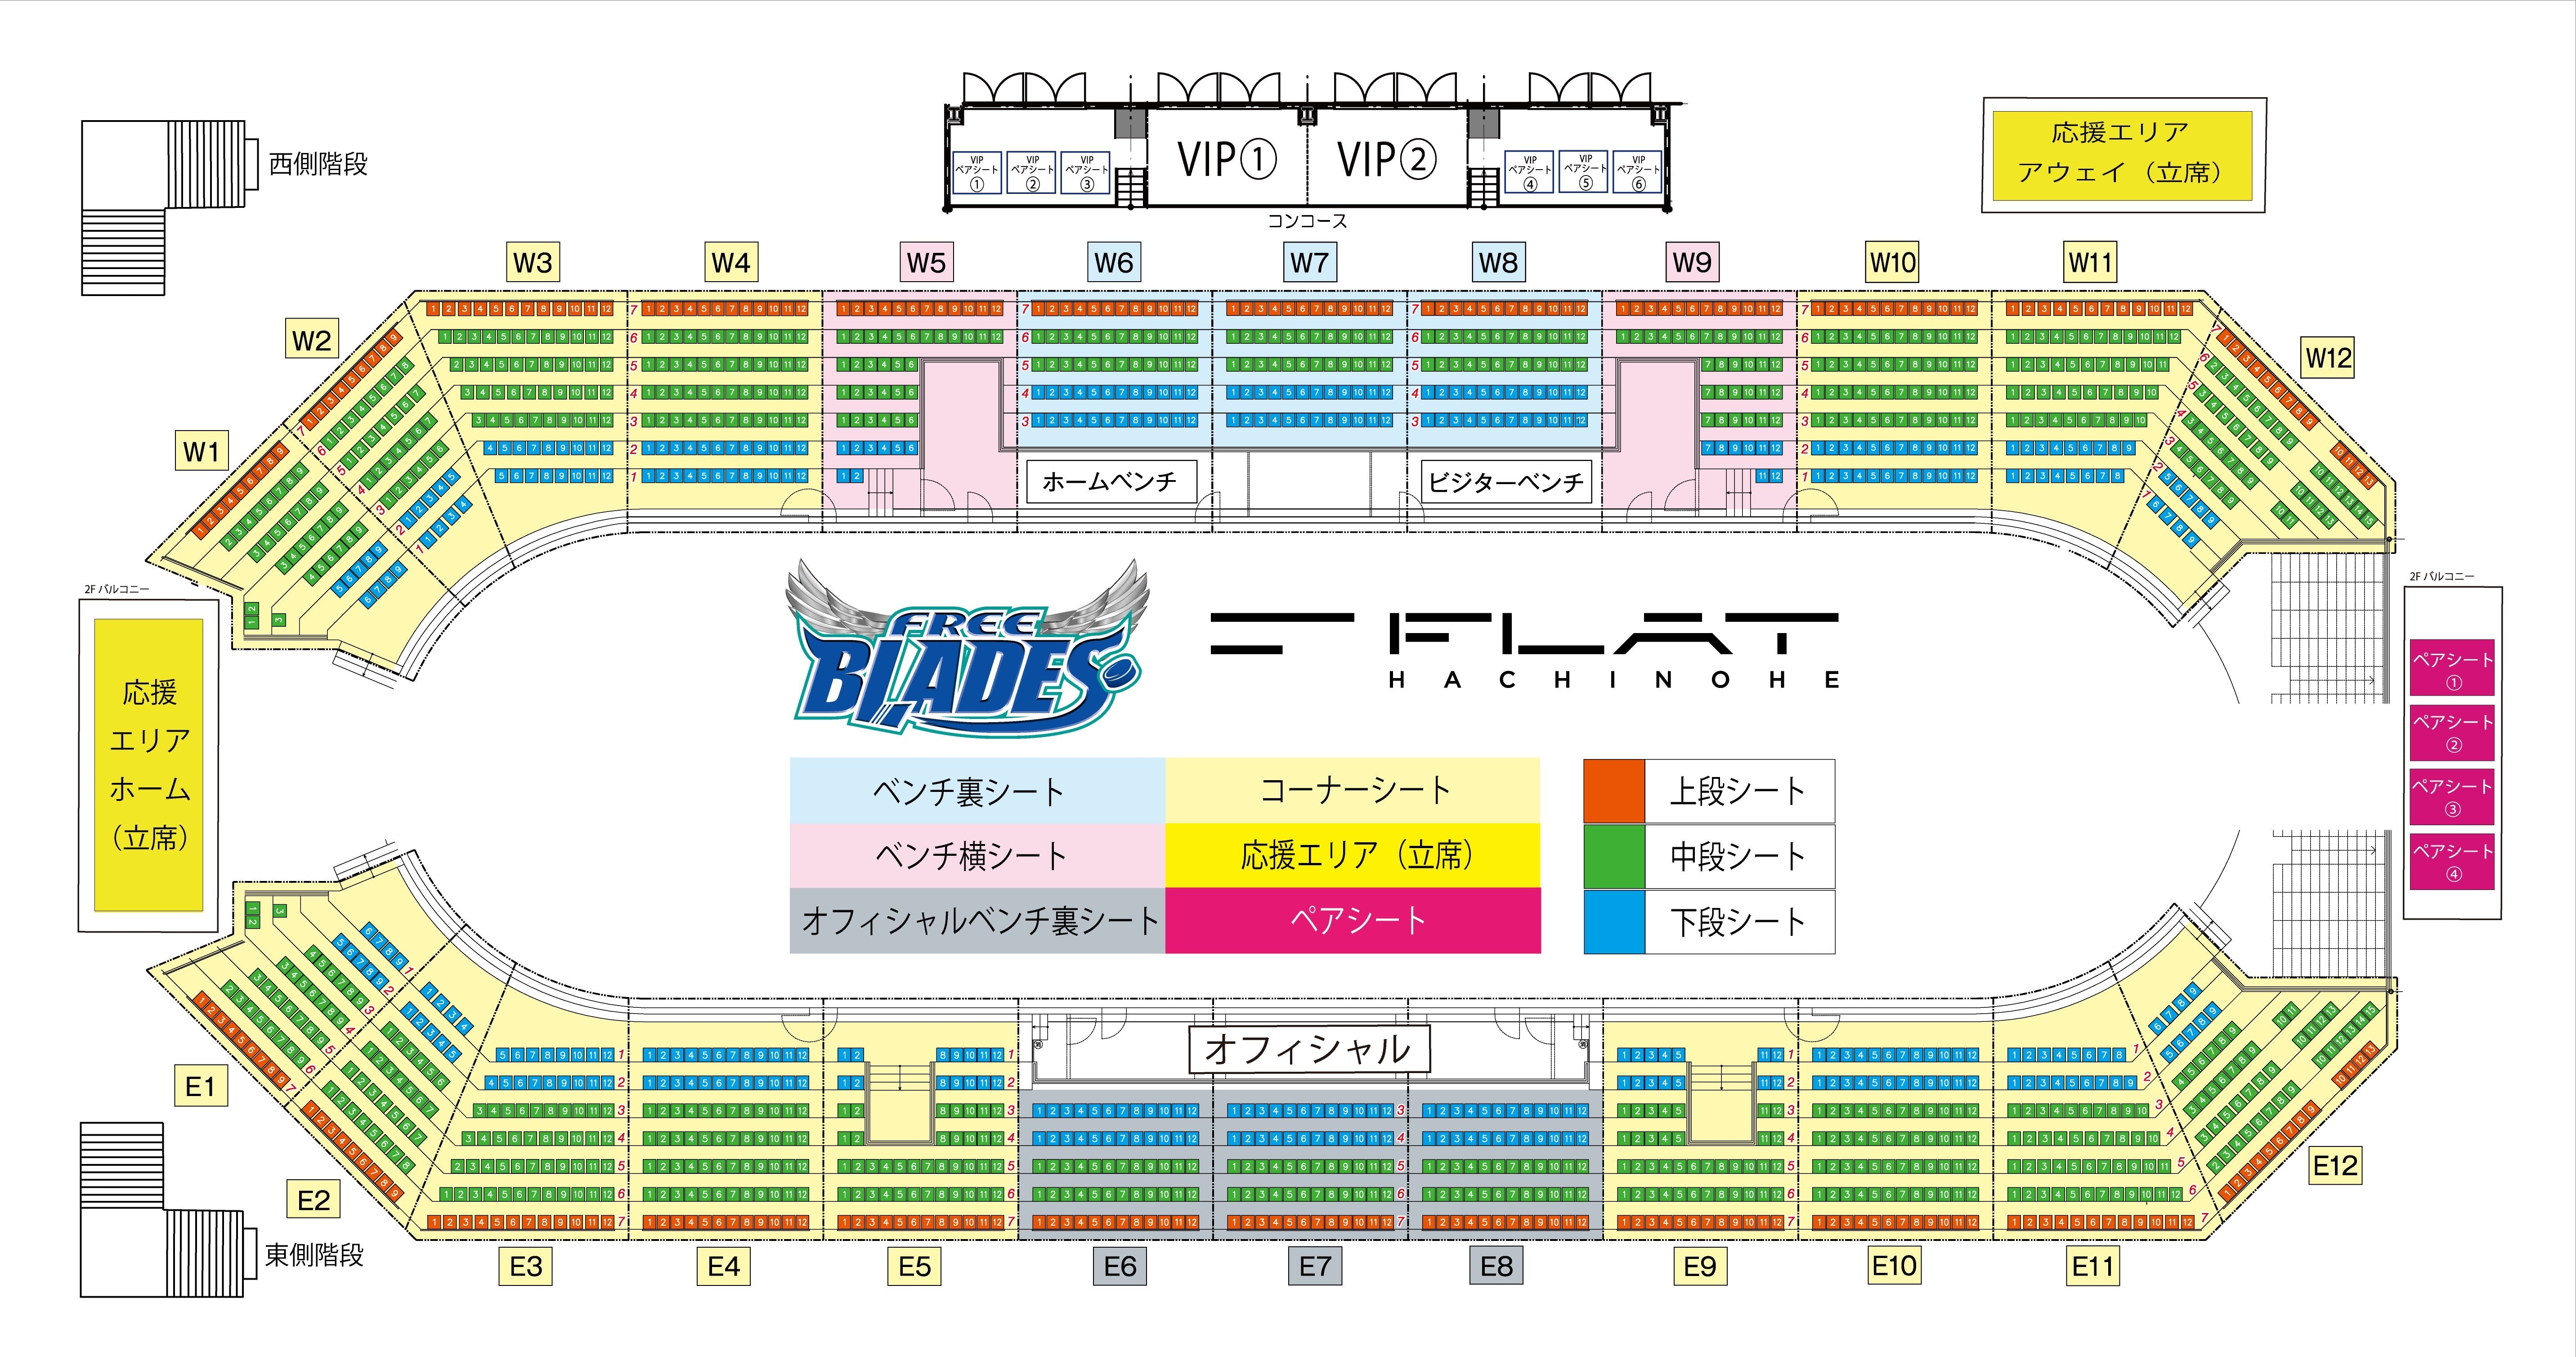 W8 / Bench back seat / 2023-24 Regular ticket March 9th (Sat) 17:00